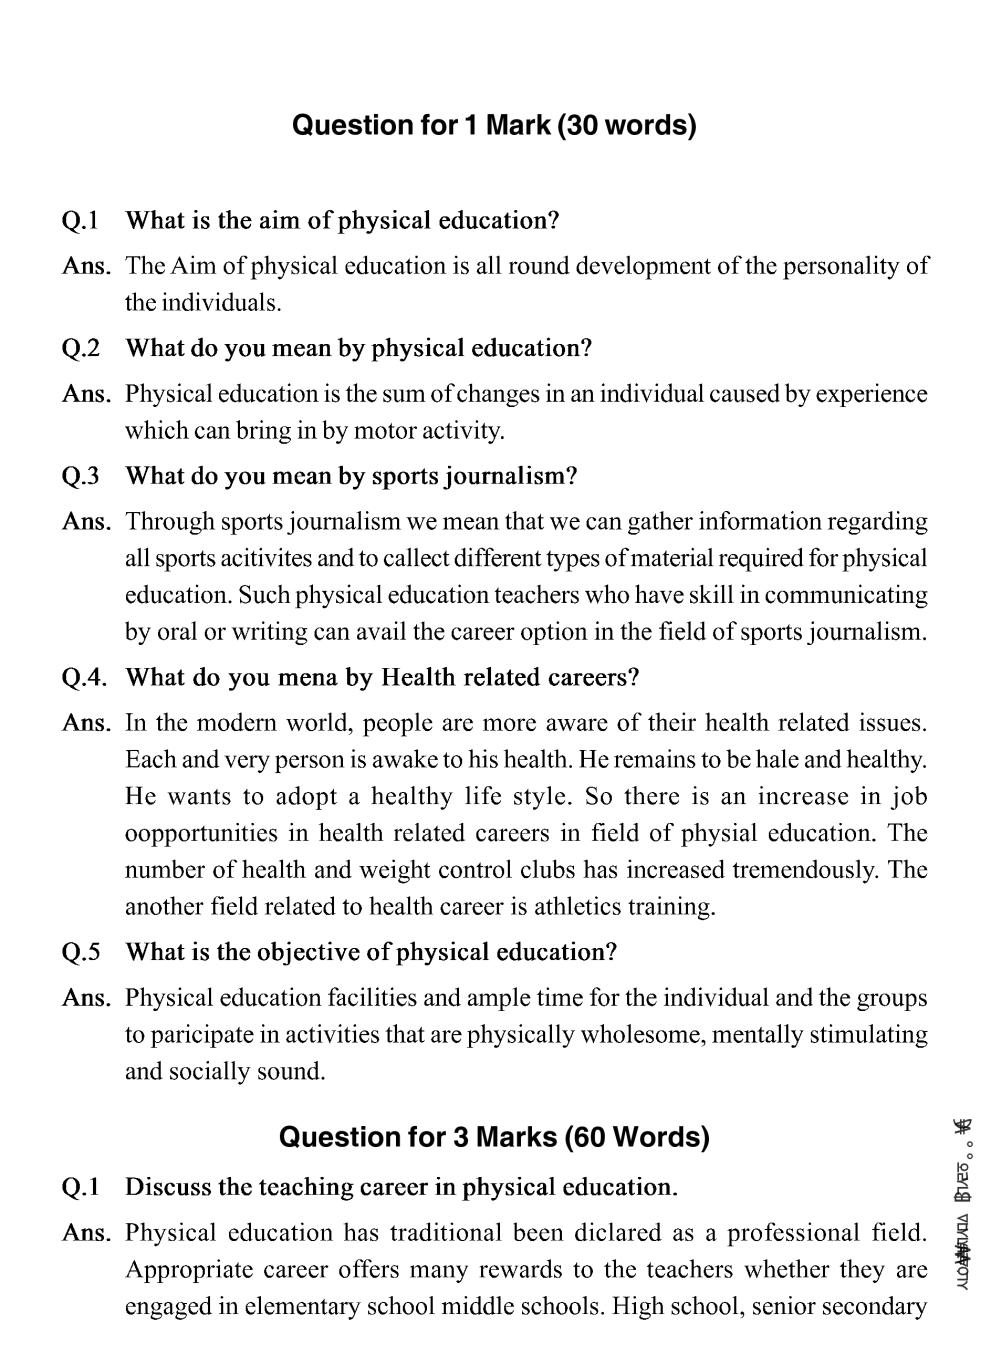 essay questions on physical education